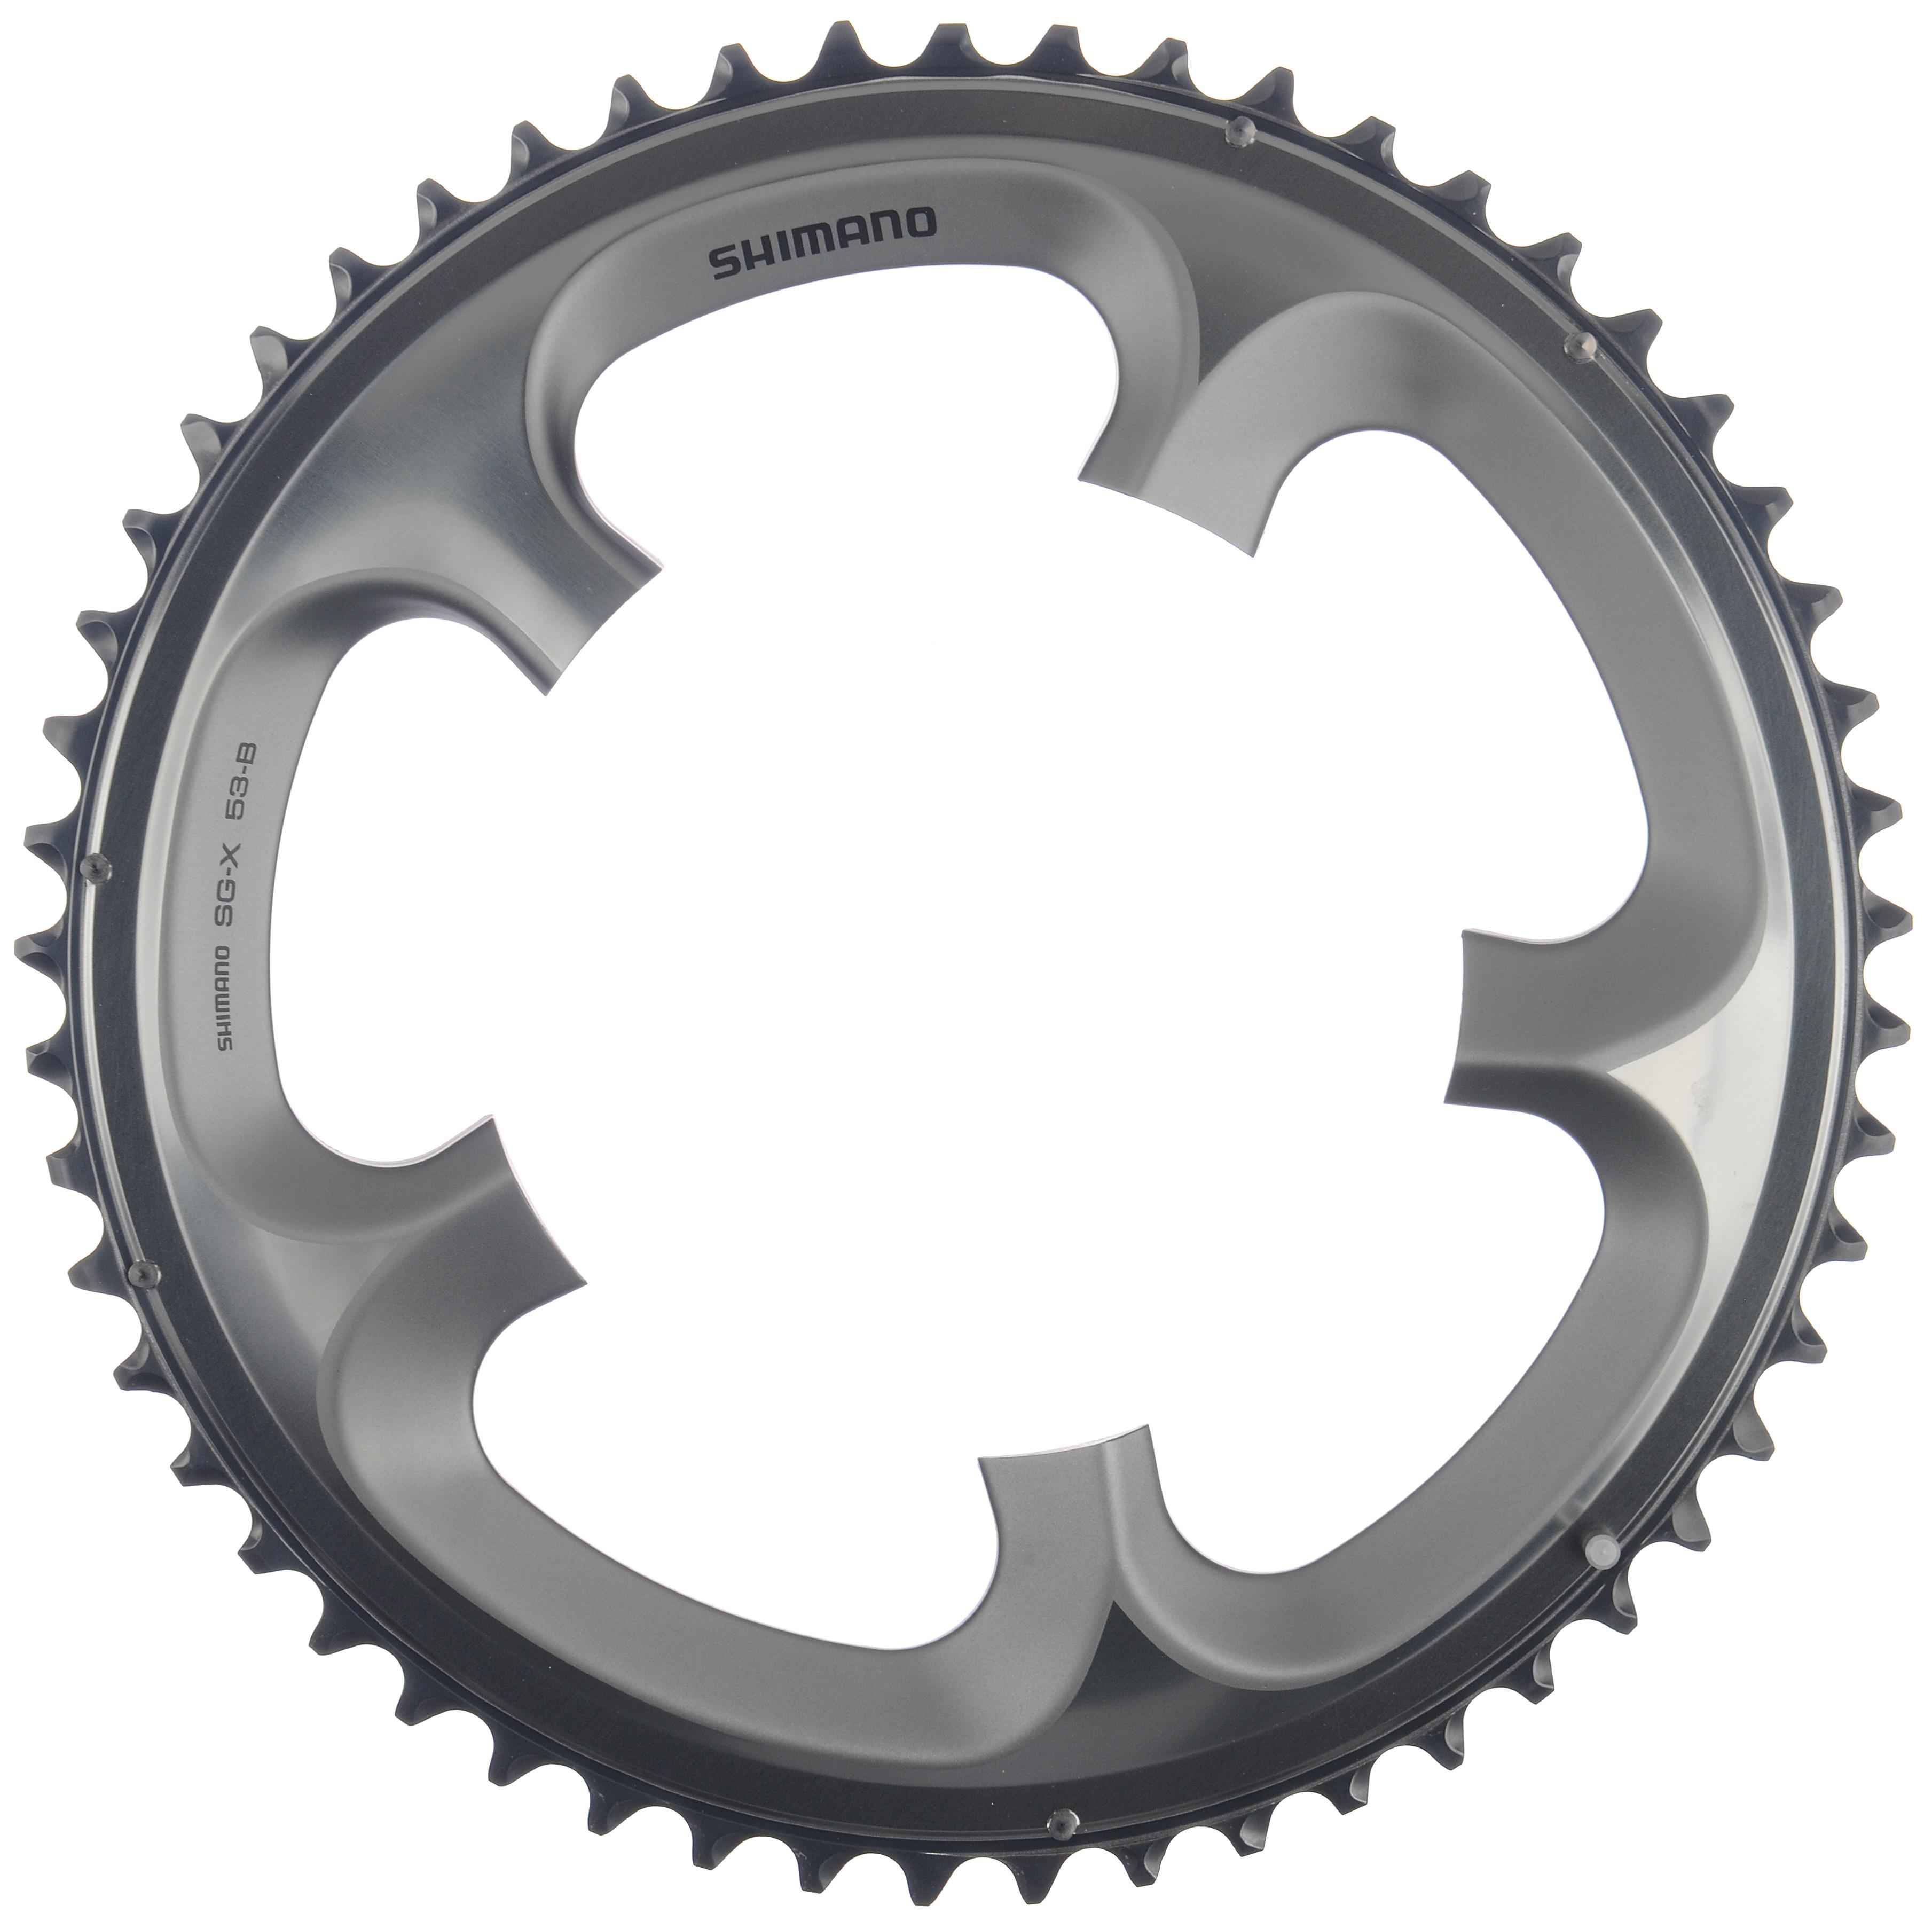 Shimano Ultegra Fc6700 10 Speed Double Chainring  Silver